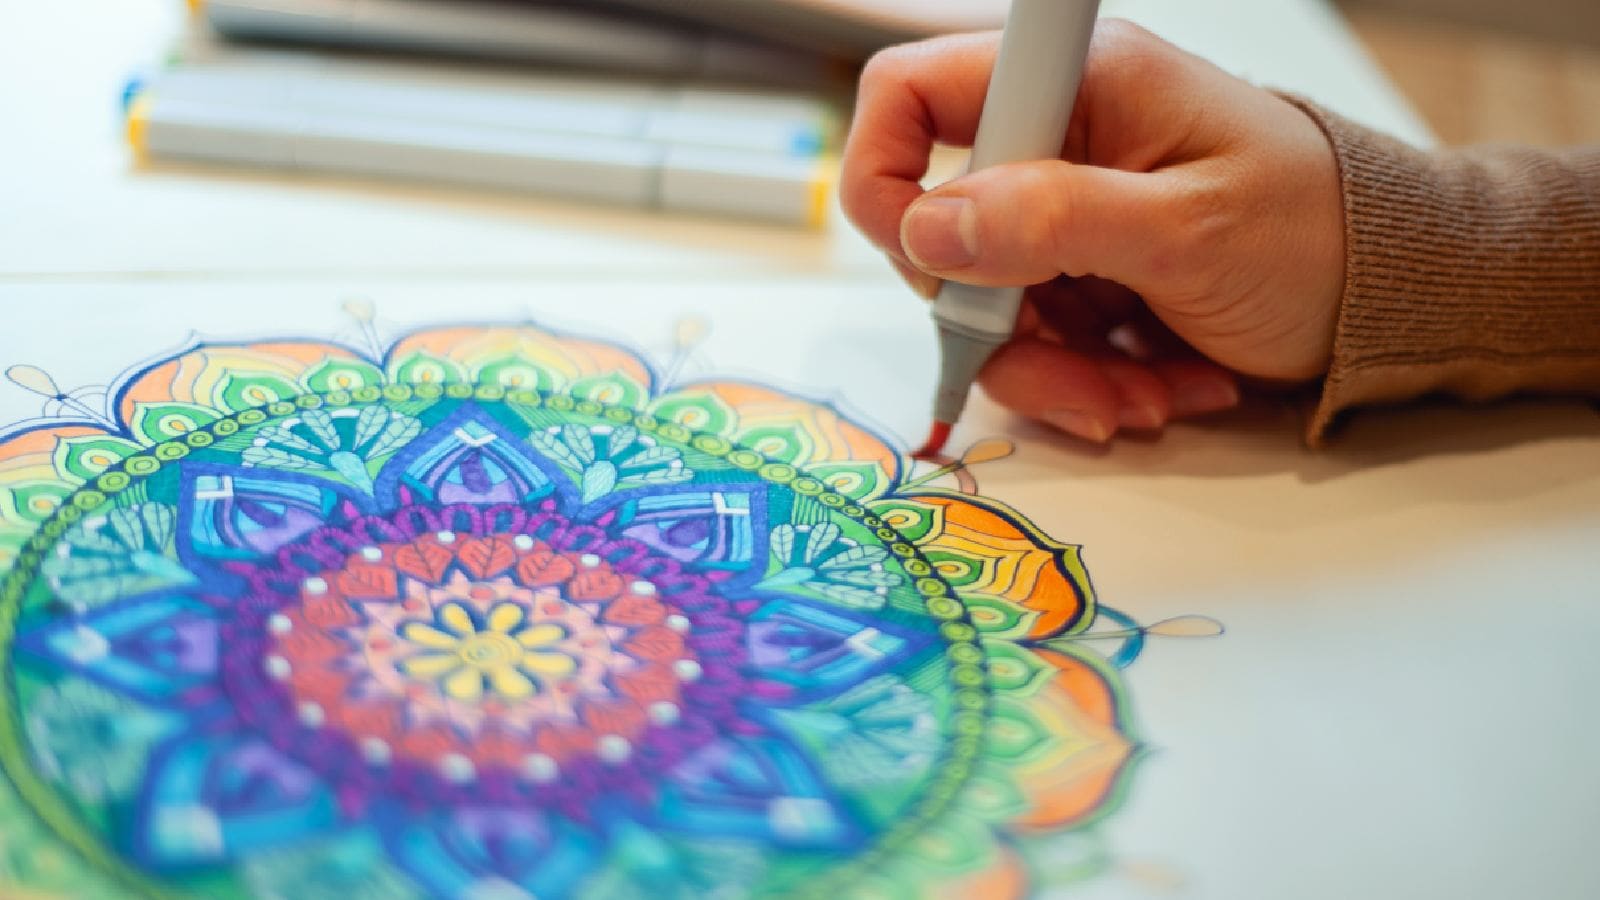 5 best adult colouring books to release stress and anxiety